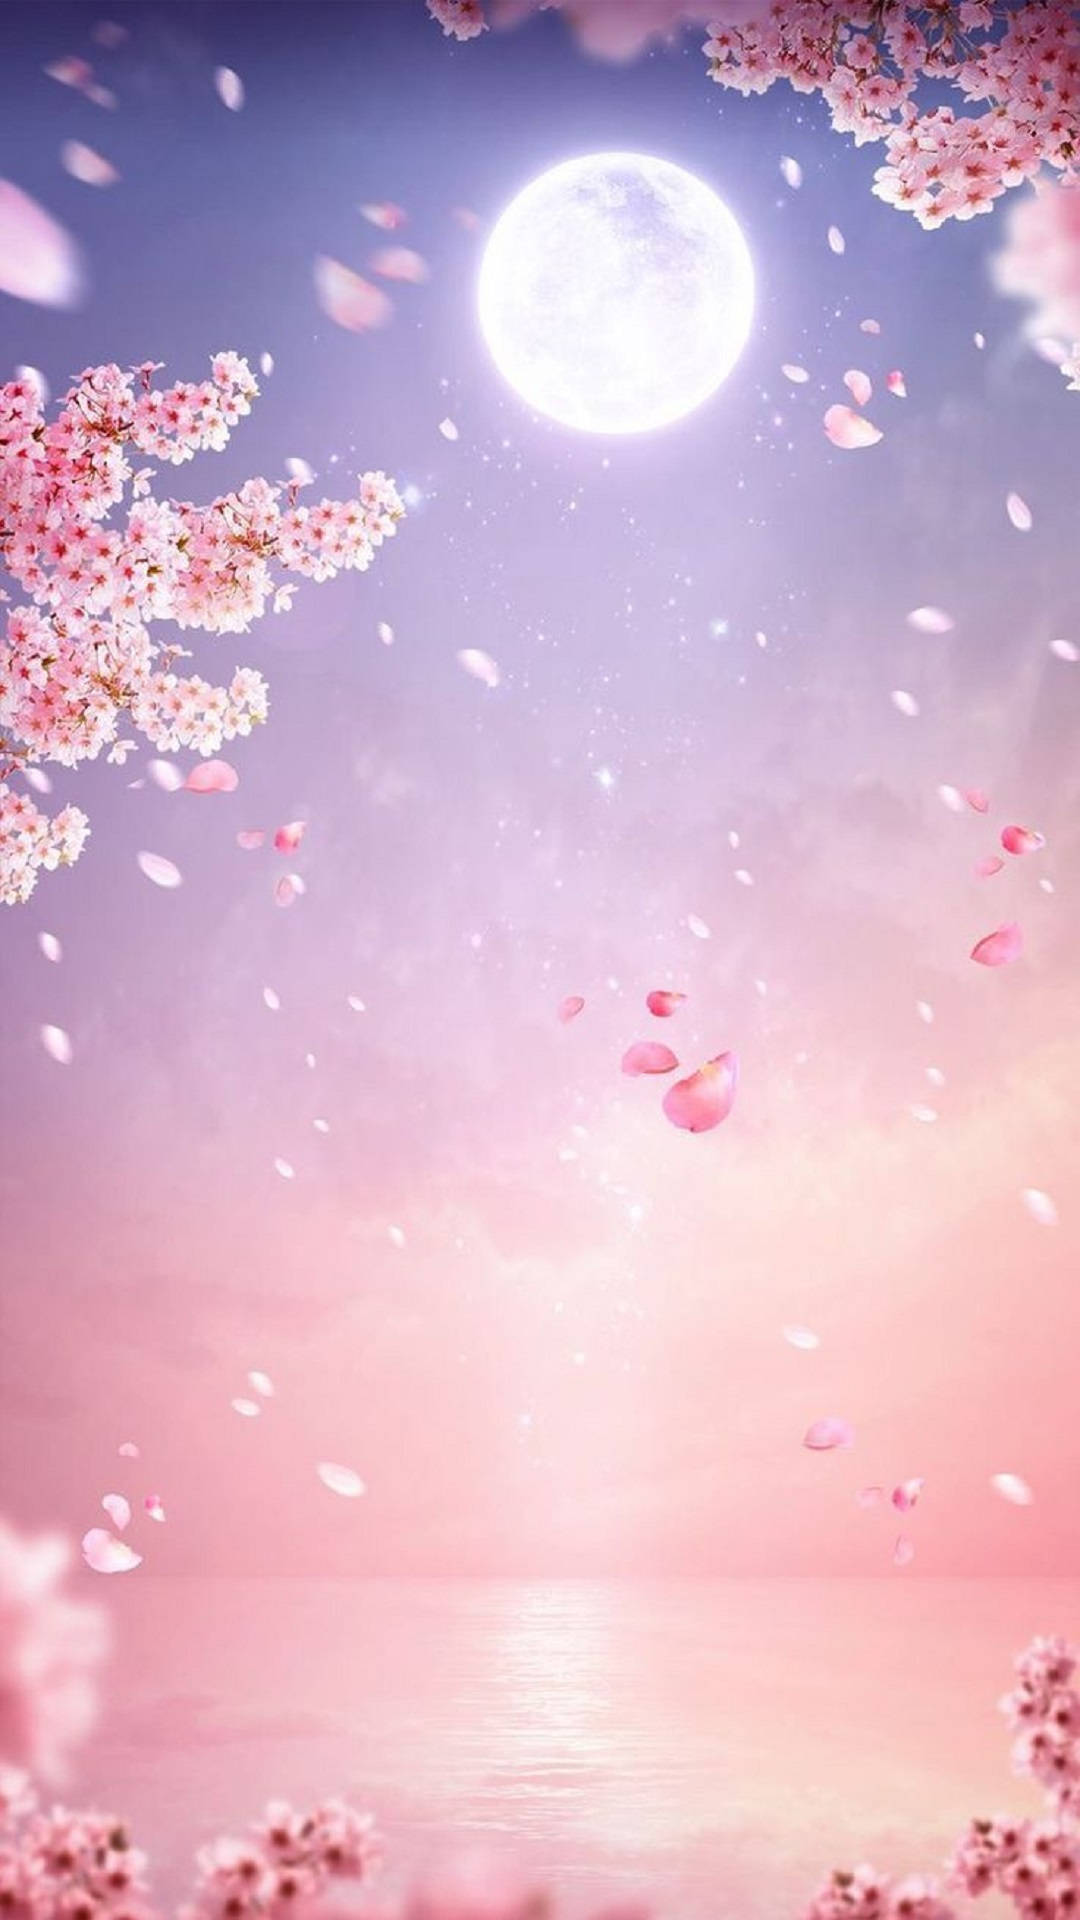 Whimsical Falling Flowers Background